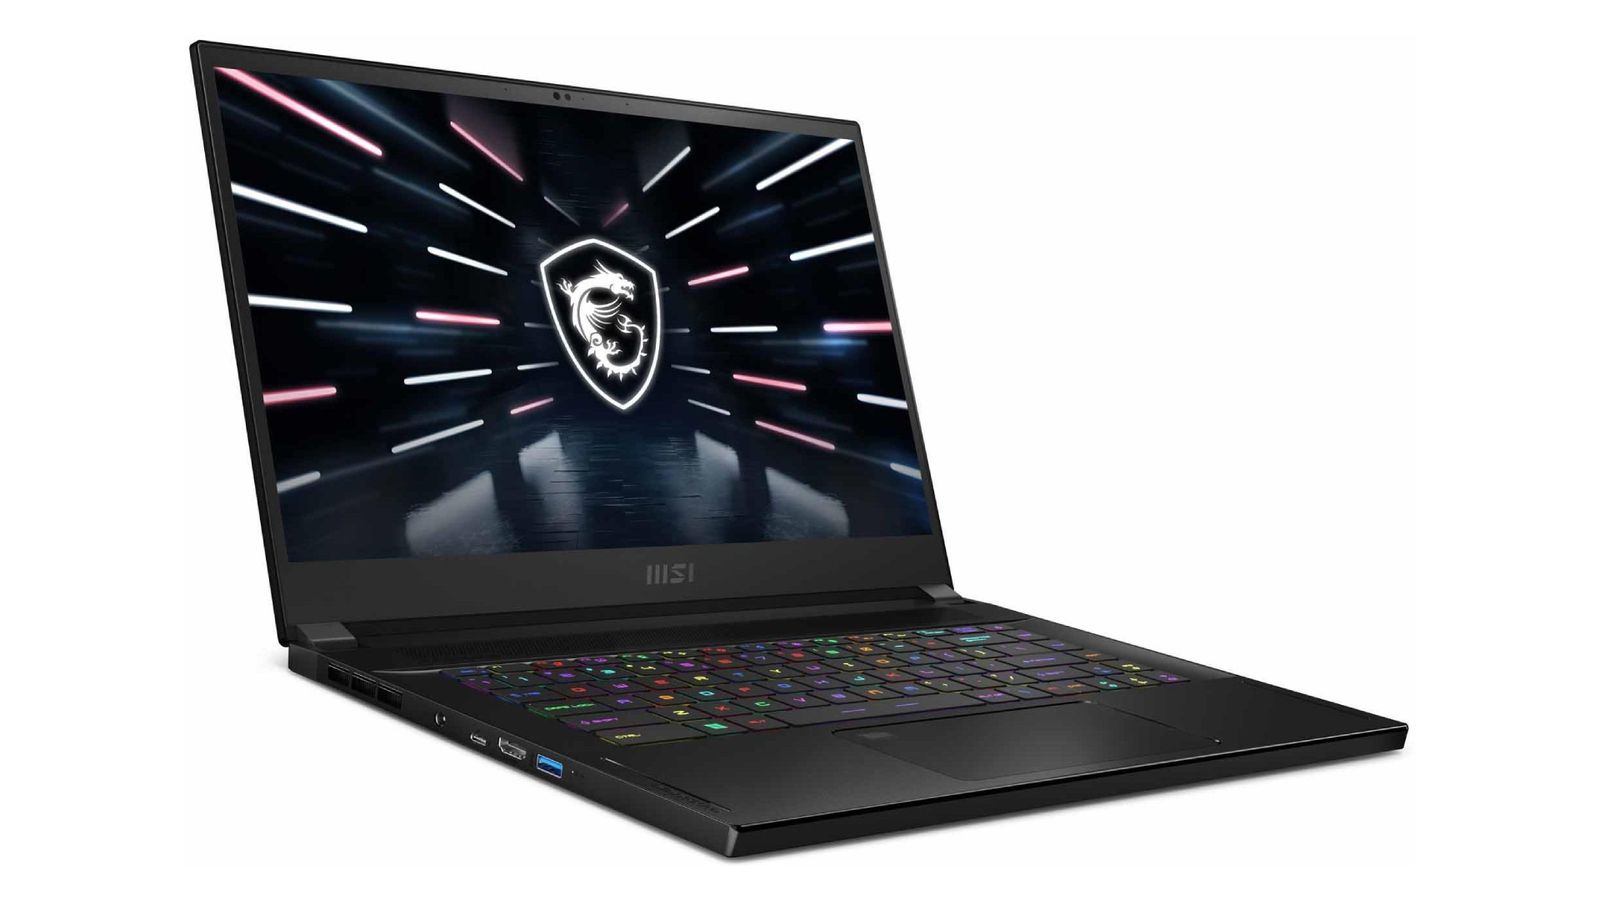 Best Redfall gaming laptop - MSI Stealth GS66 product image of a black gaming laptop featuring multi-coloured backlit keys and MSI branding on the display in white.